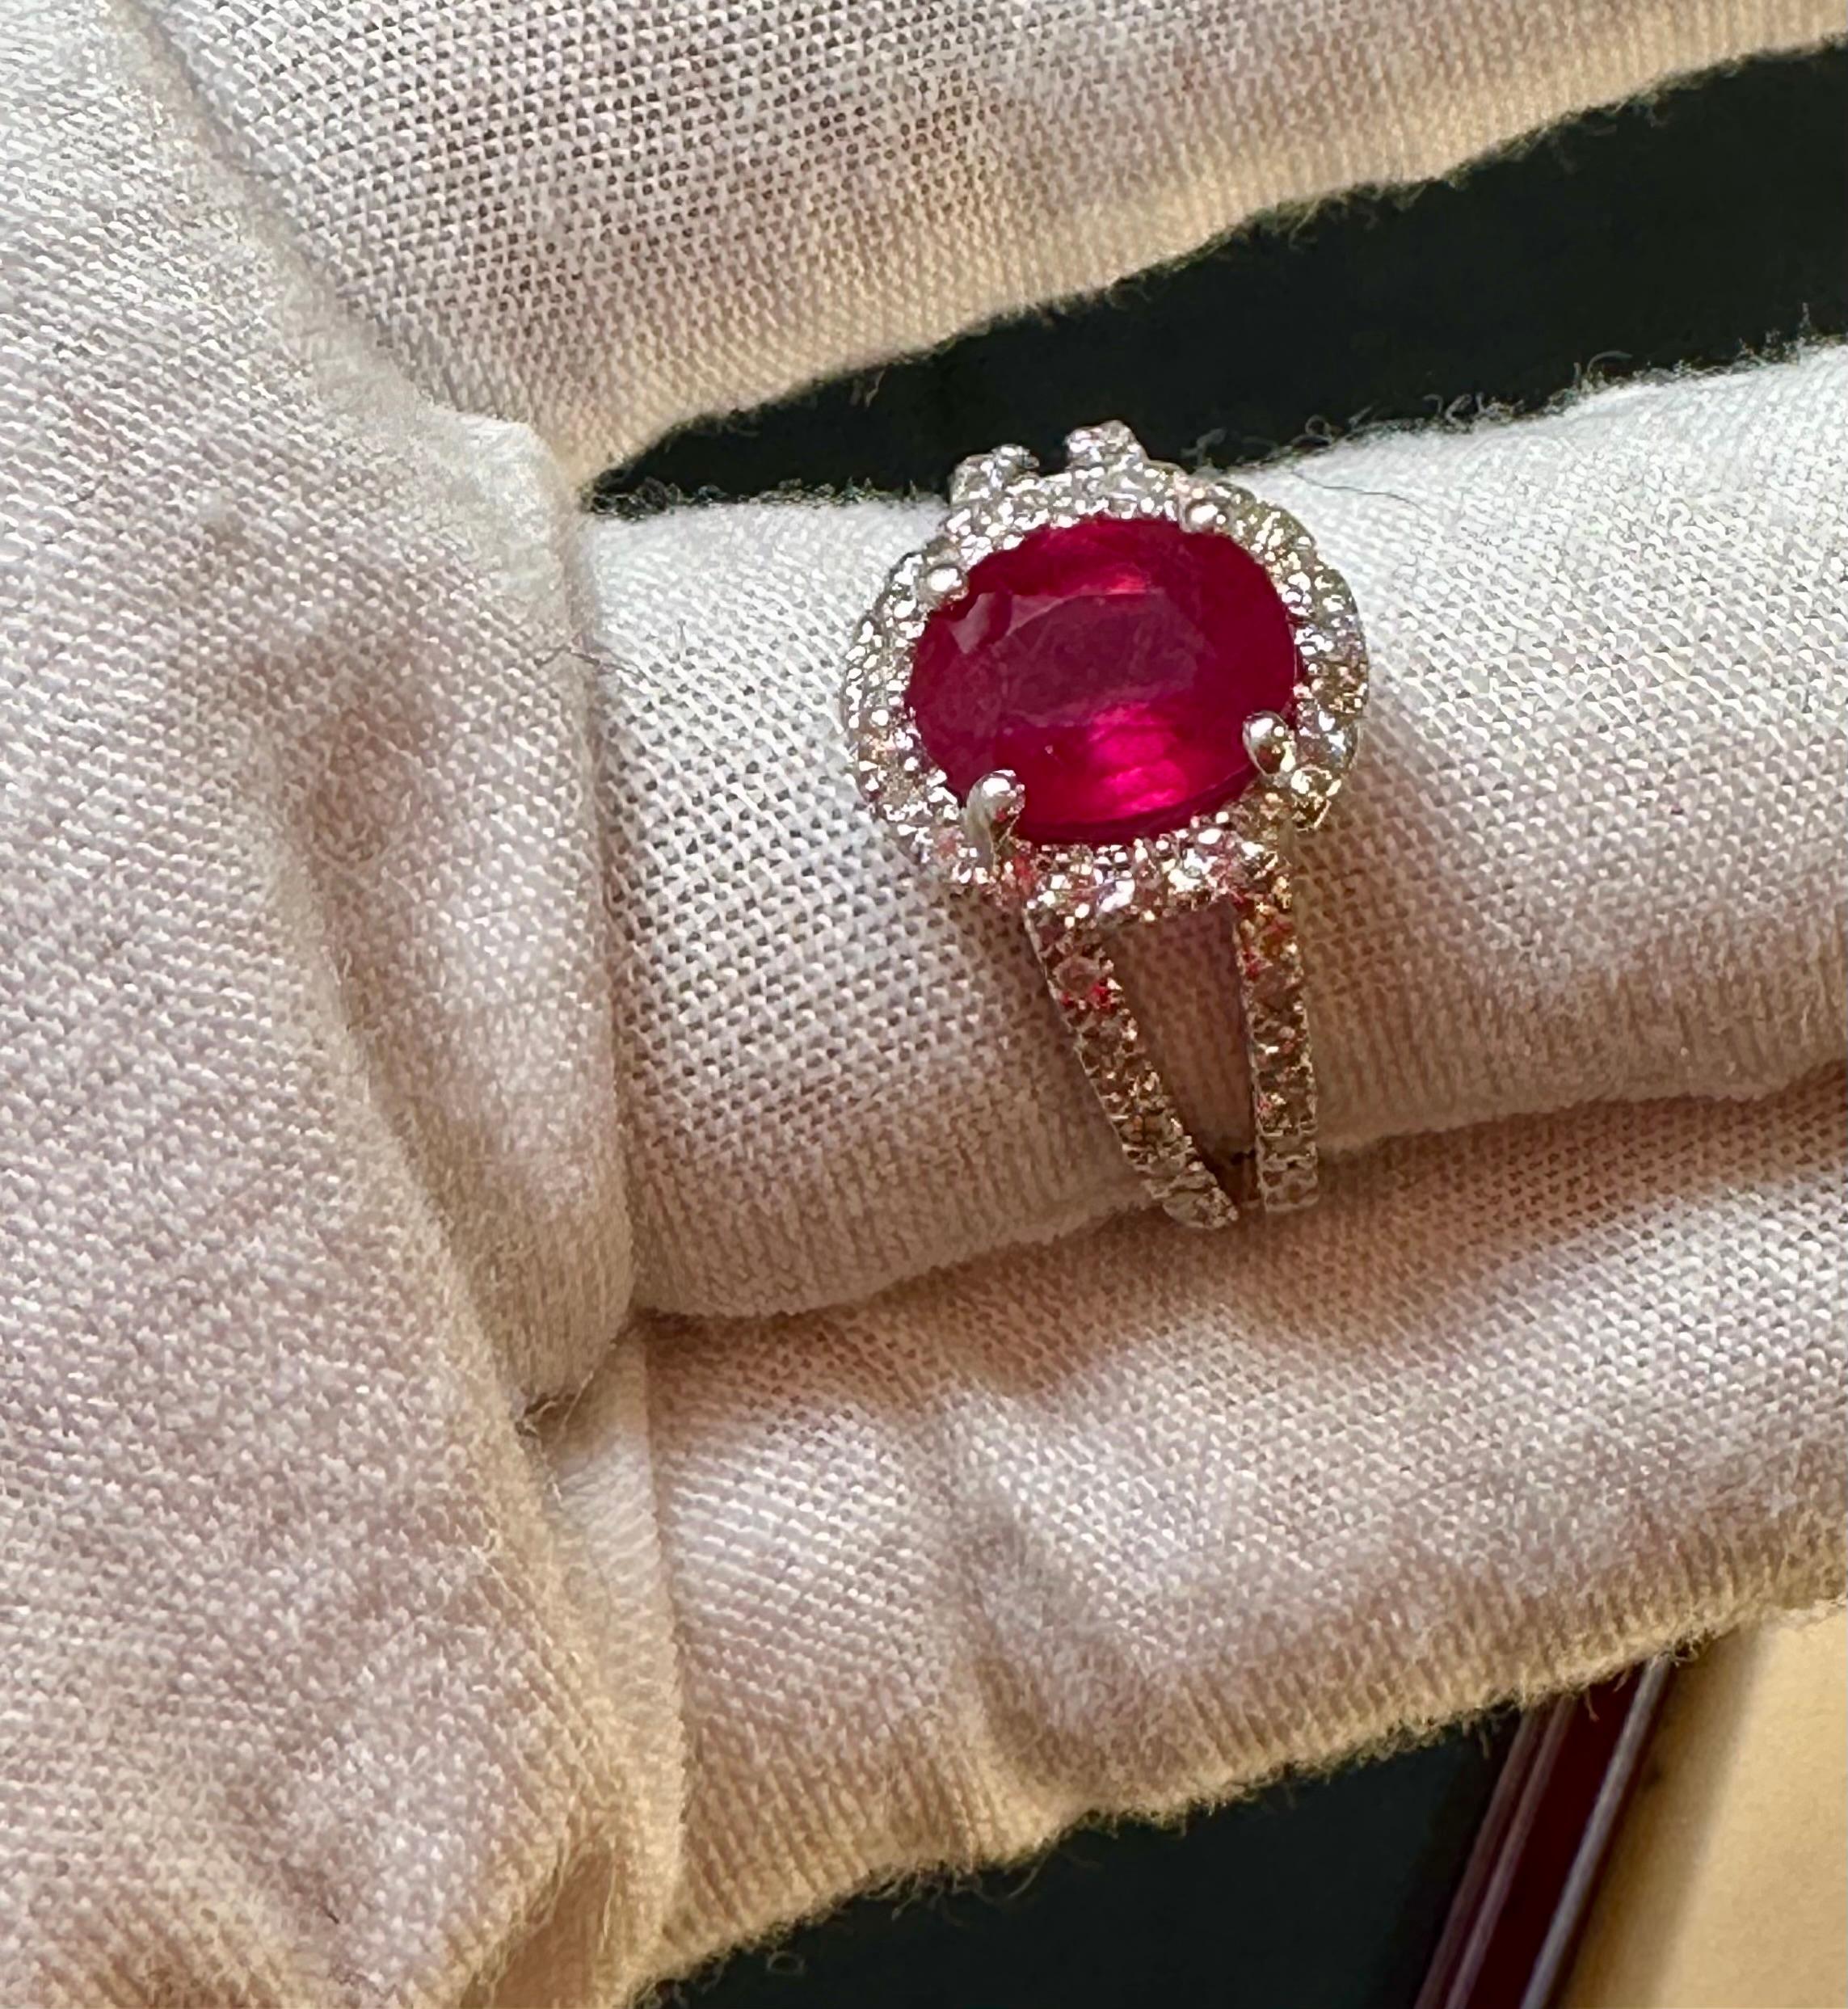 2.5 Carat Oval Treated Ruby & 2 ct Diamond Ring 14 Karat White Gold Size 7 For Sale 1